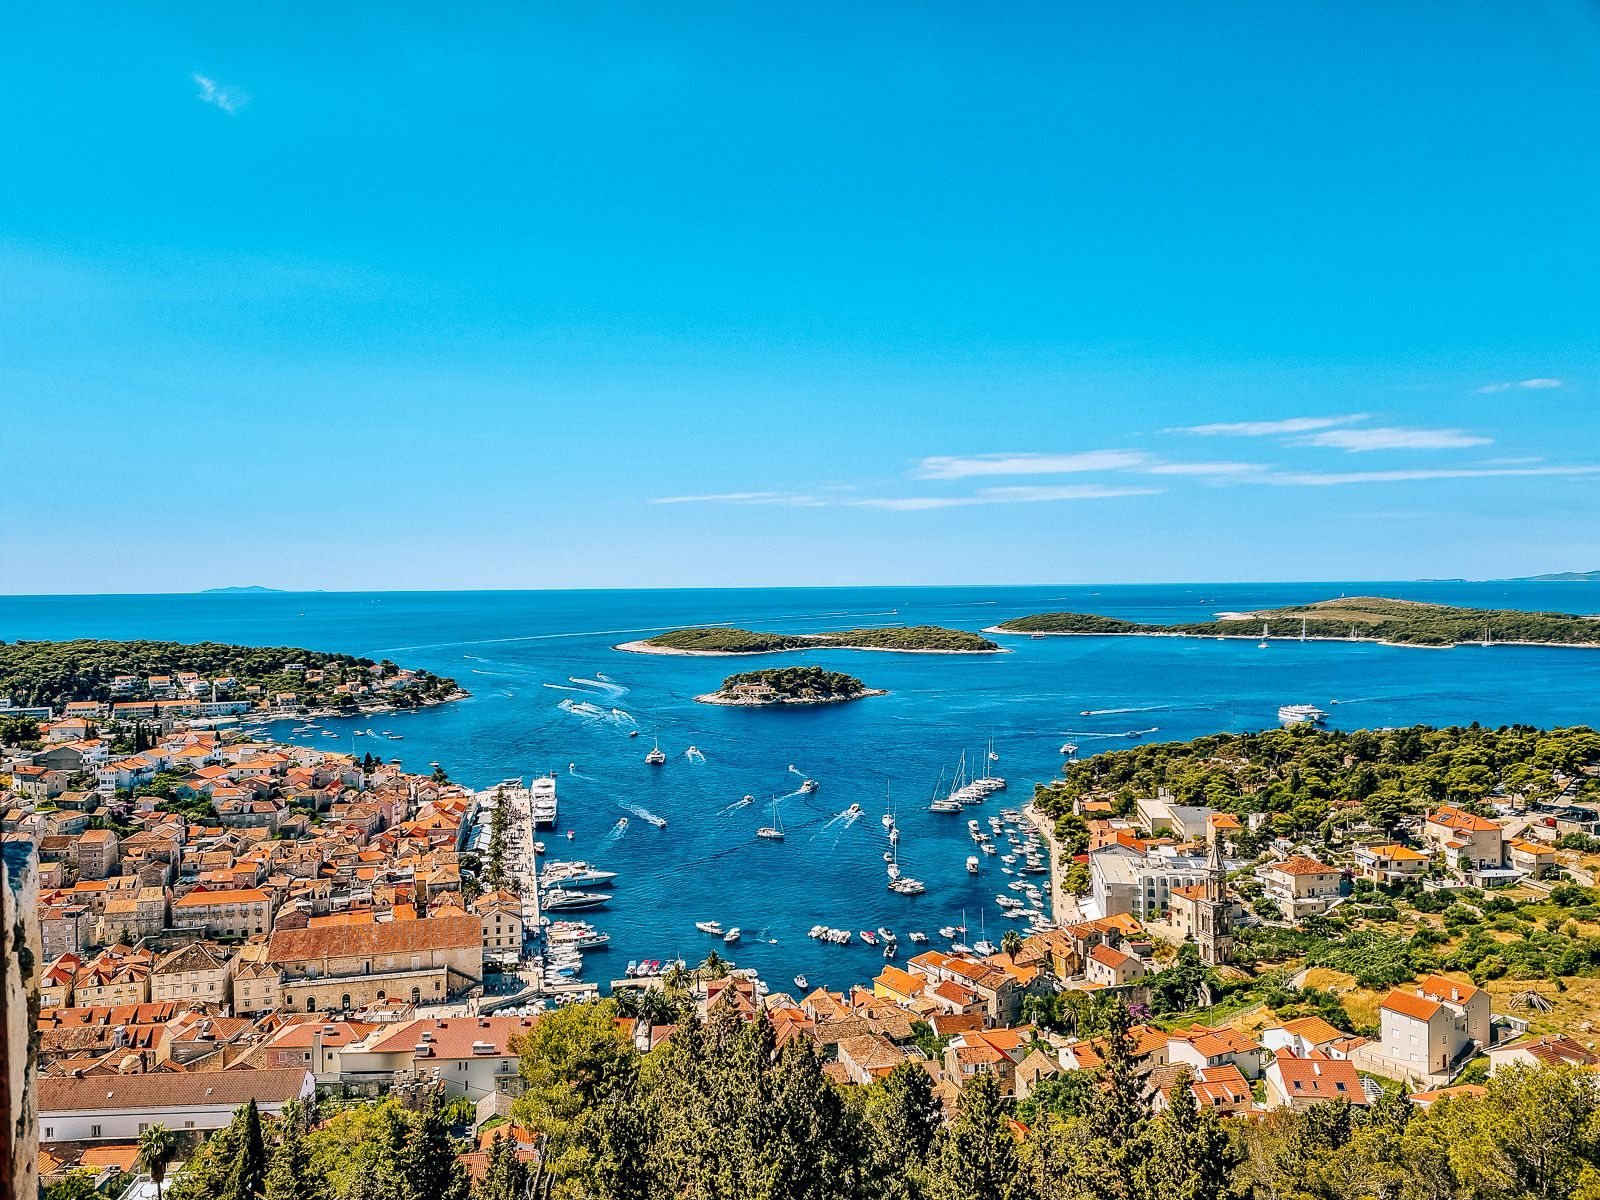 A panorama view from a fortress, looking down on Hvar town below, orange roof tops can be seen around a bay with bright blue water and boats coming and going. Islands in the sea in the distance